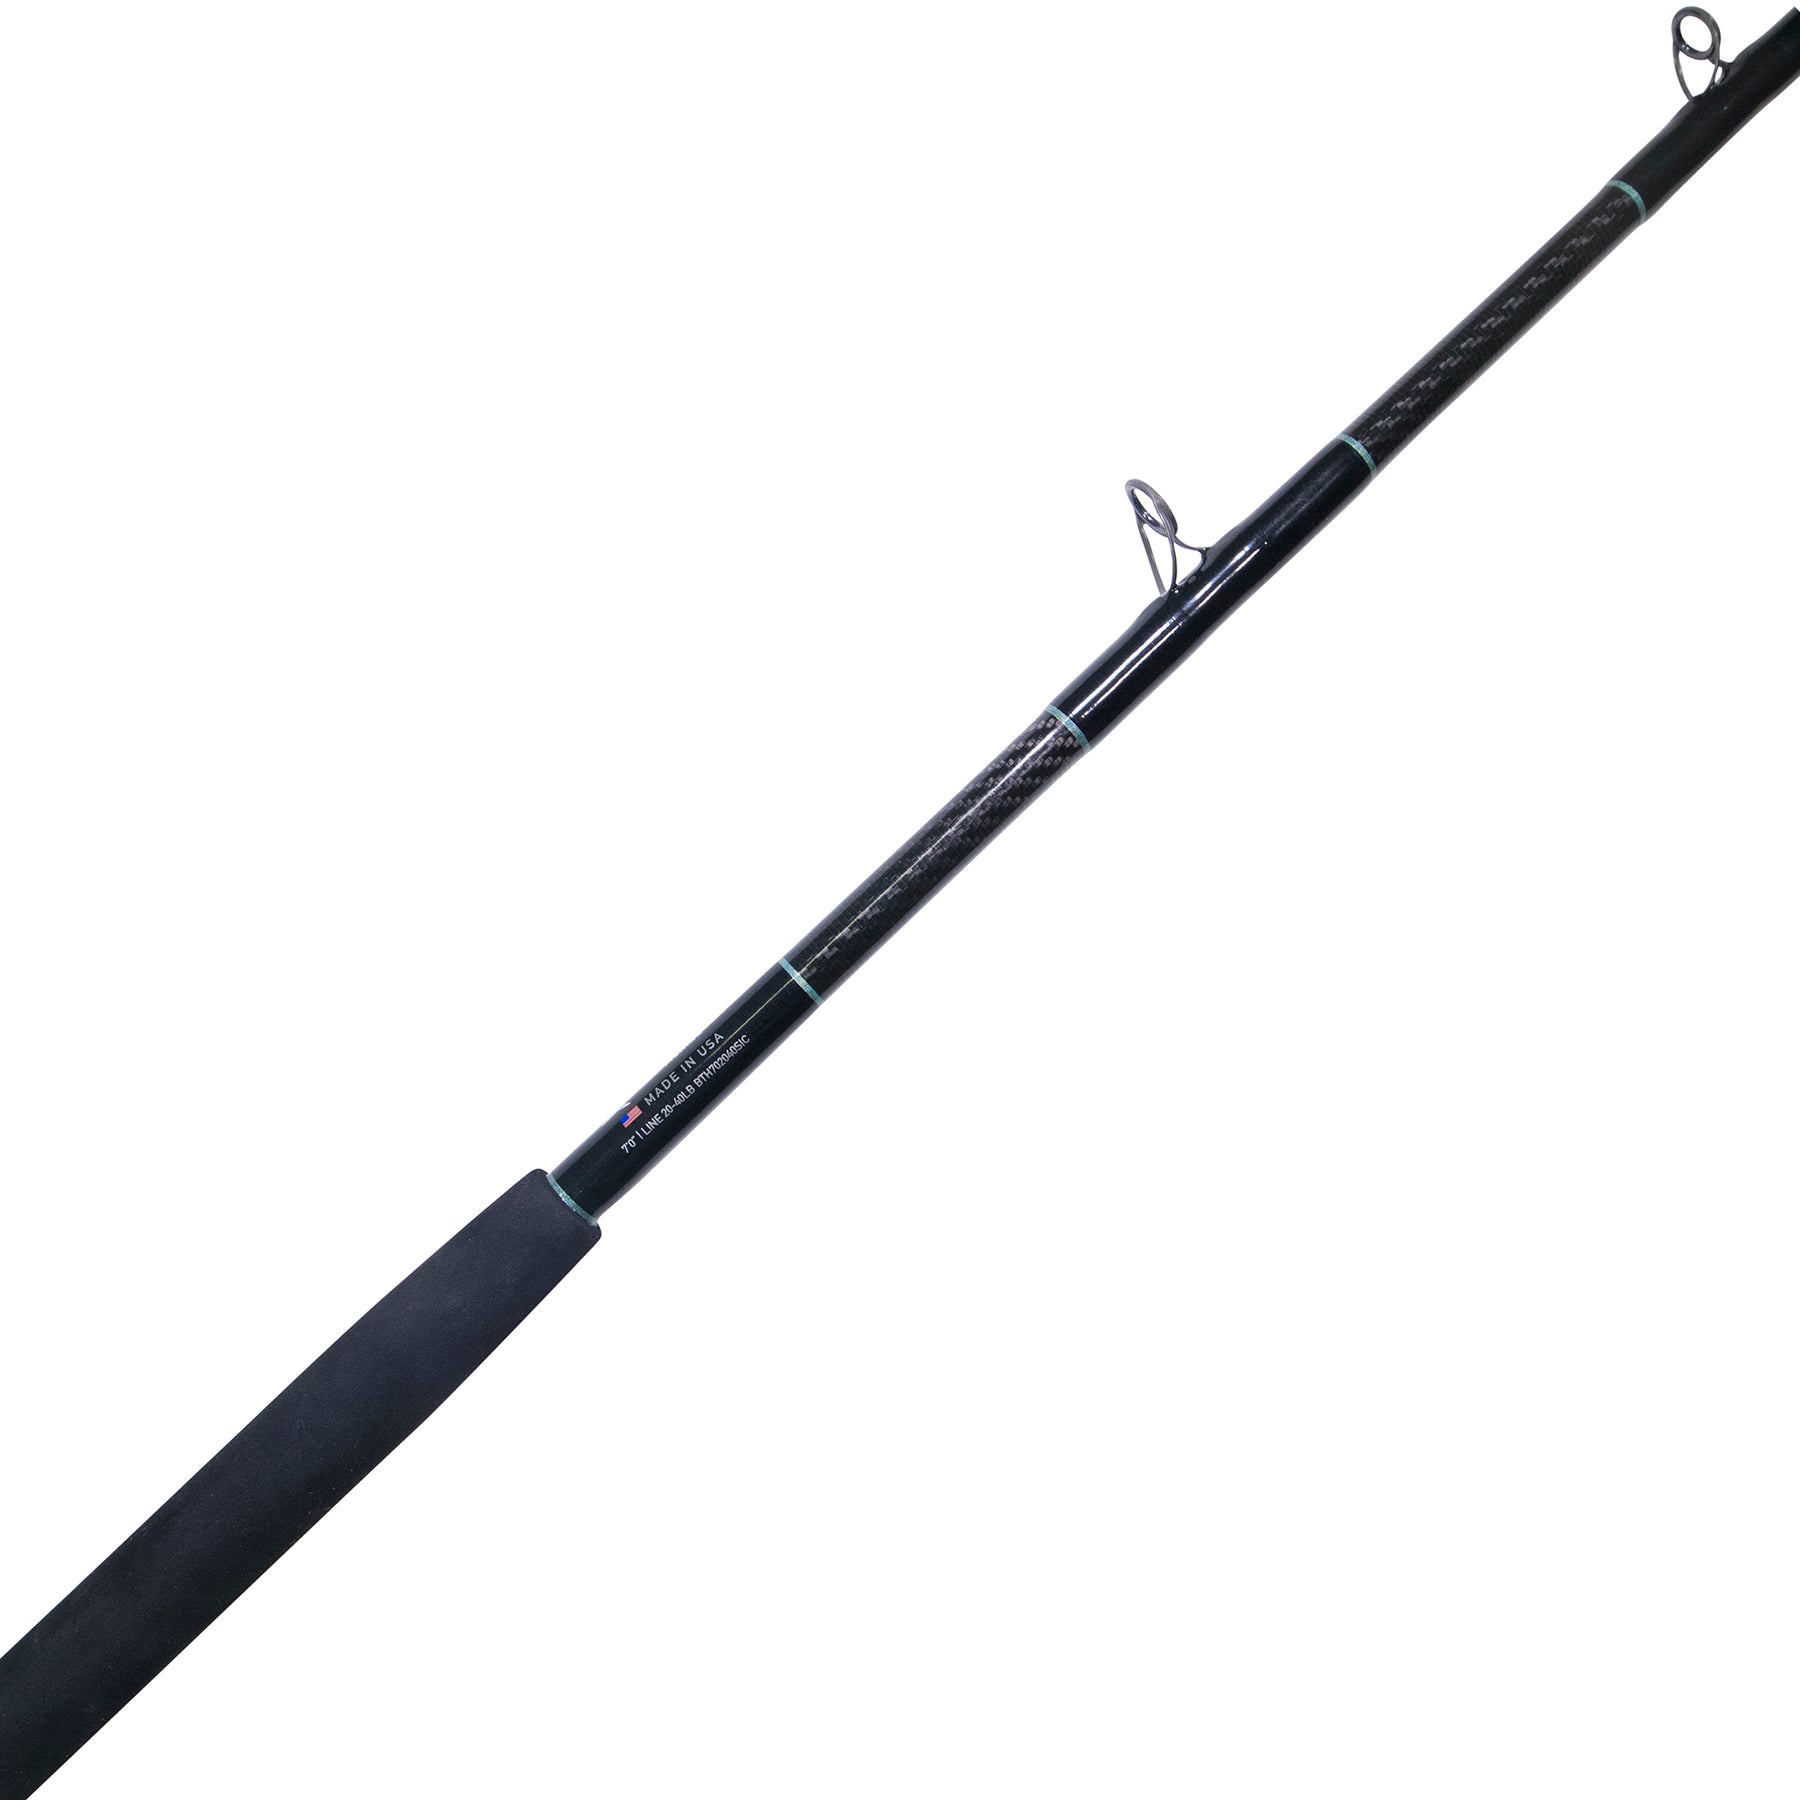 BlacktipH Live Bait Fishing Rod with Winthrop Epic Butt and Carbon